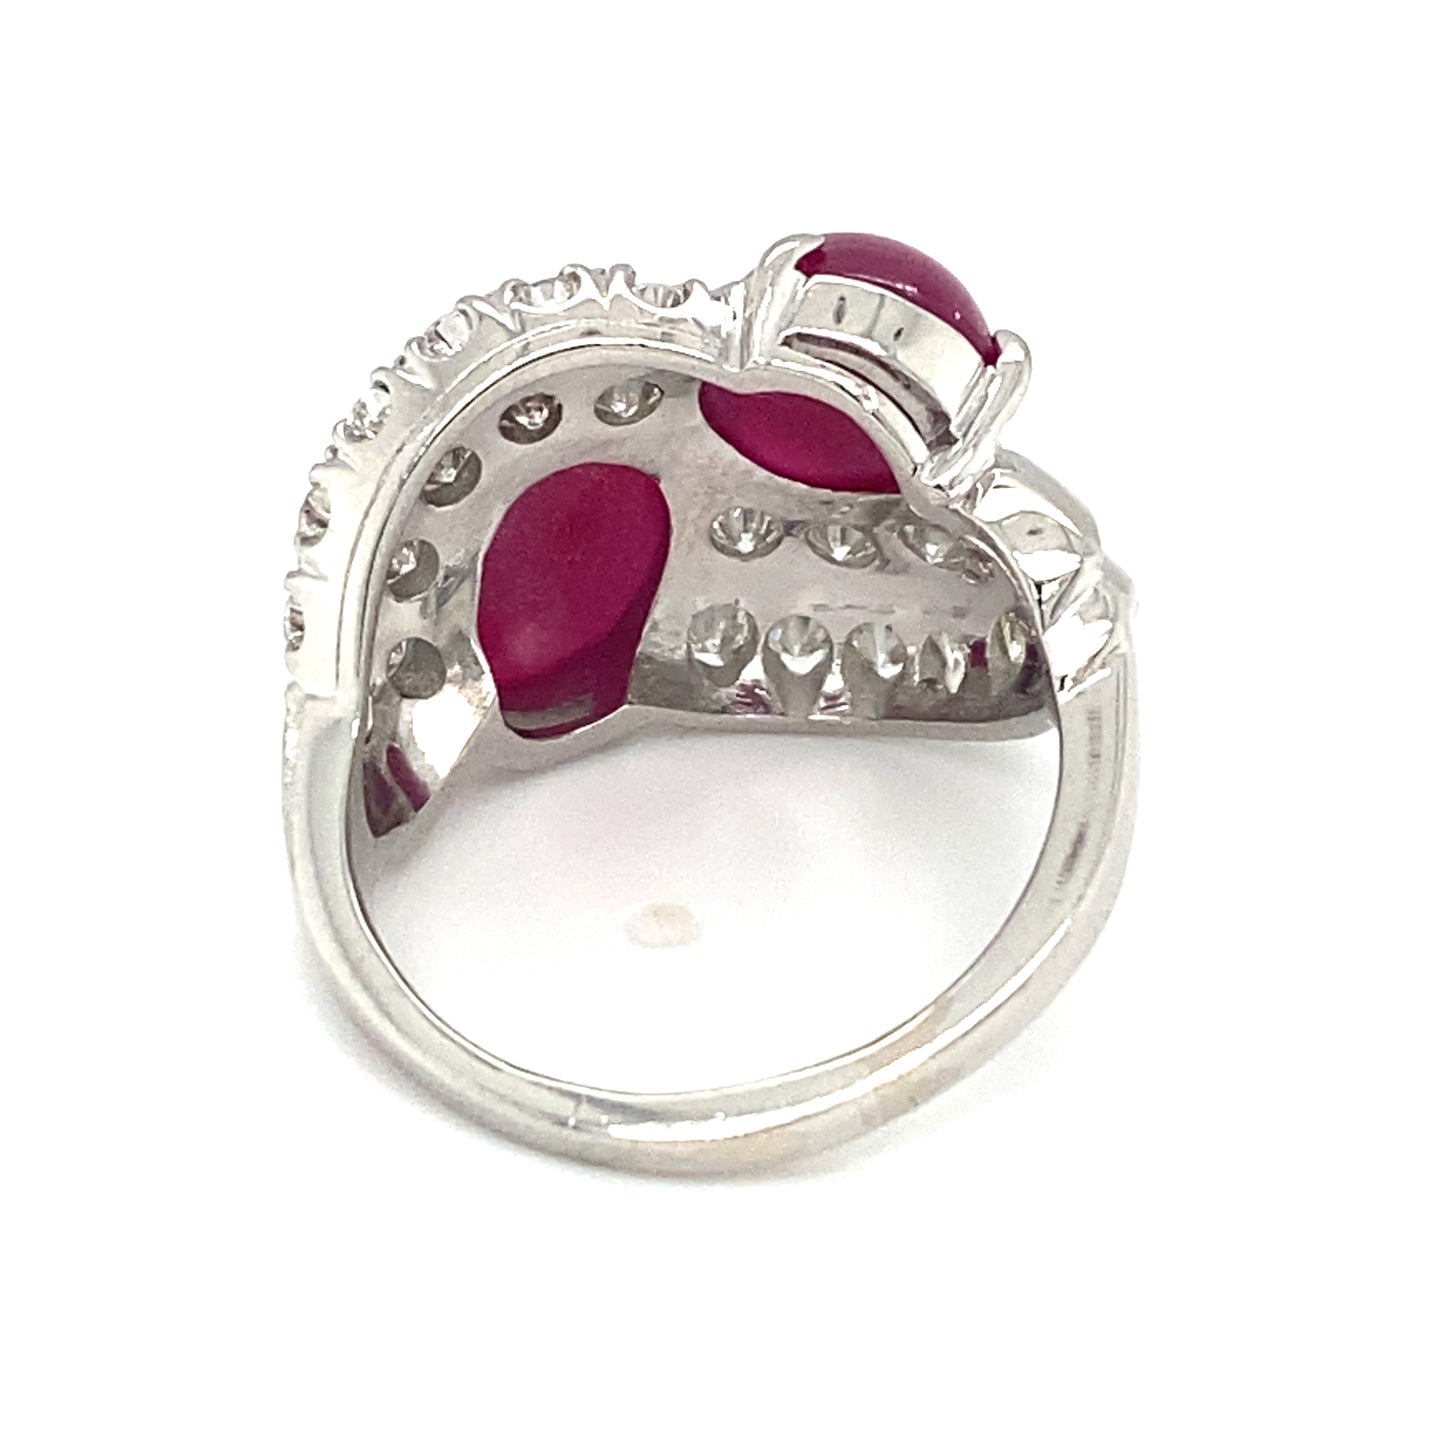 Circa 1940s Toi et Moi Star Ruby and Diamond Ring in Platinum